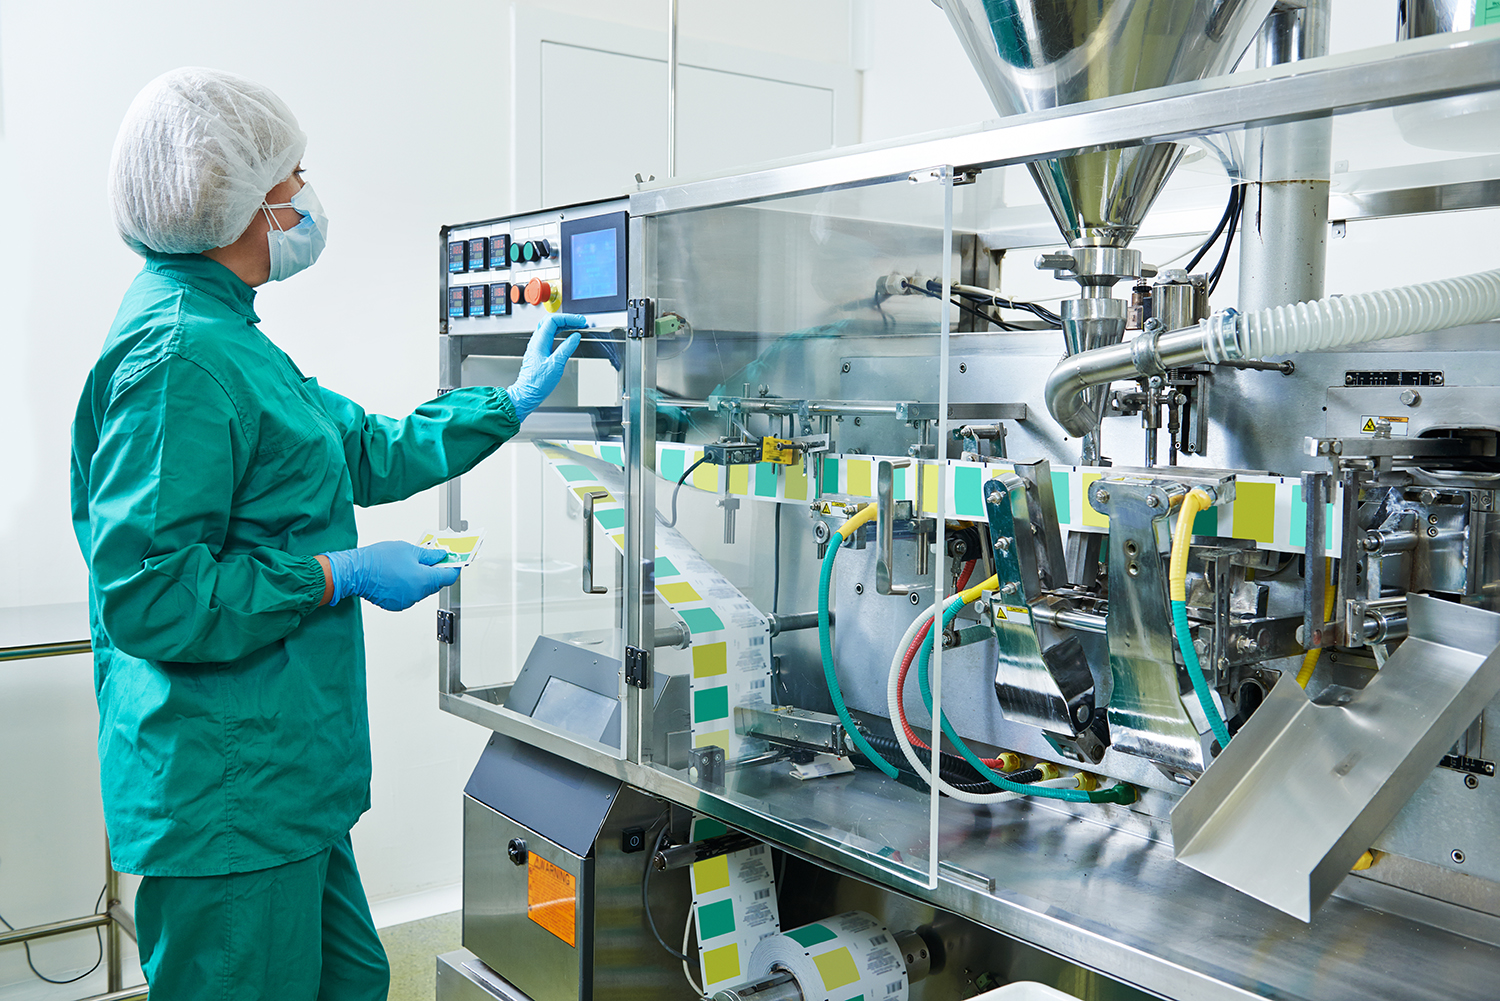 A worker at a pharmaceutical manufacturing plant enters commands into a control panel.